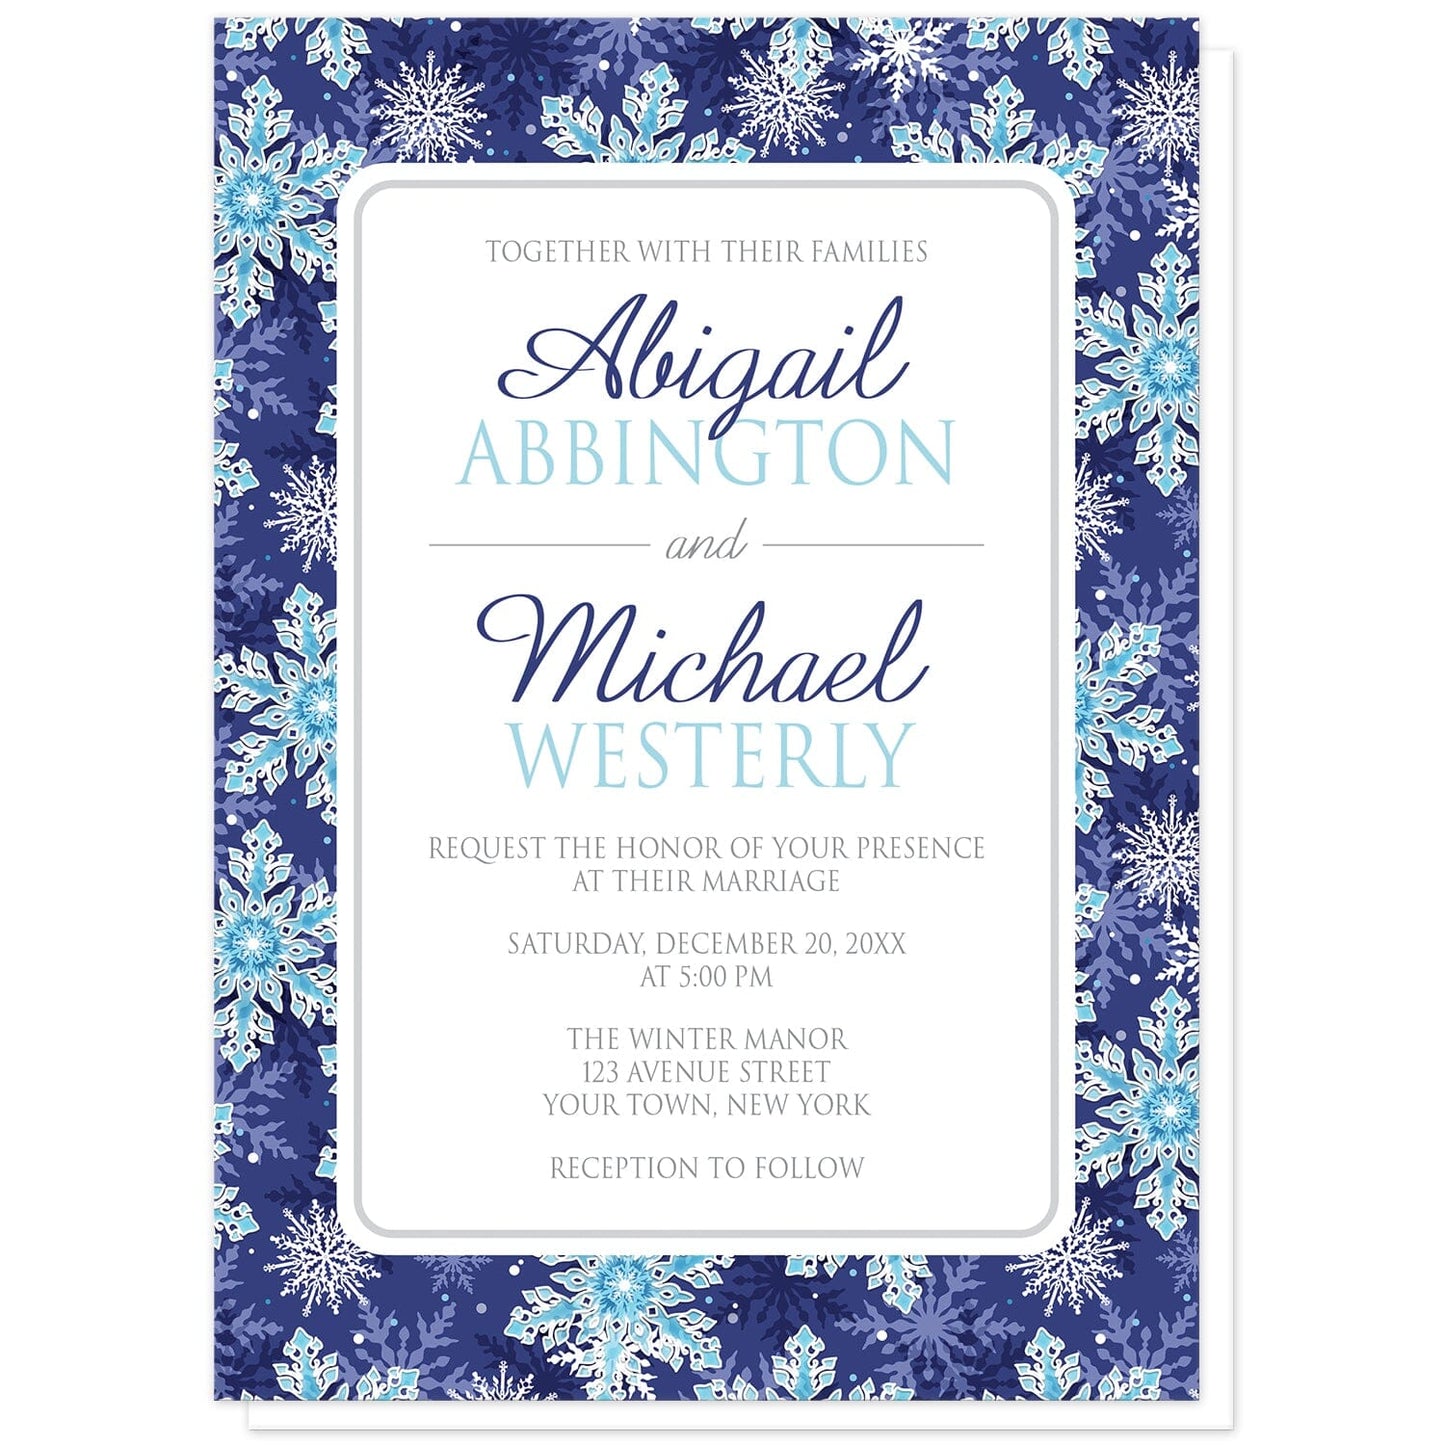 Navy Blue Aqua Snowflake Wedding Invitations at Artistically Invited. Pretty navy blue aqua snowflake wedding invitations with a pattern of white and aqua blue snowflakes over a navy blue background. Your personalized marriage celebration details are custom printed in navy blue, aqua blue and gray in a white frame area in the center over the ornate navy blue snowflakes pattern.